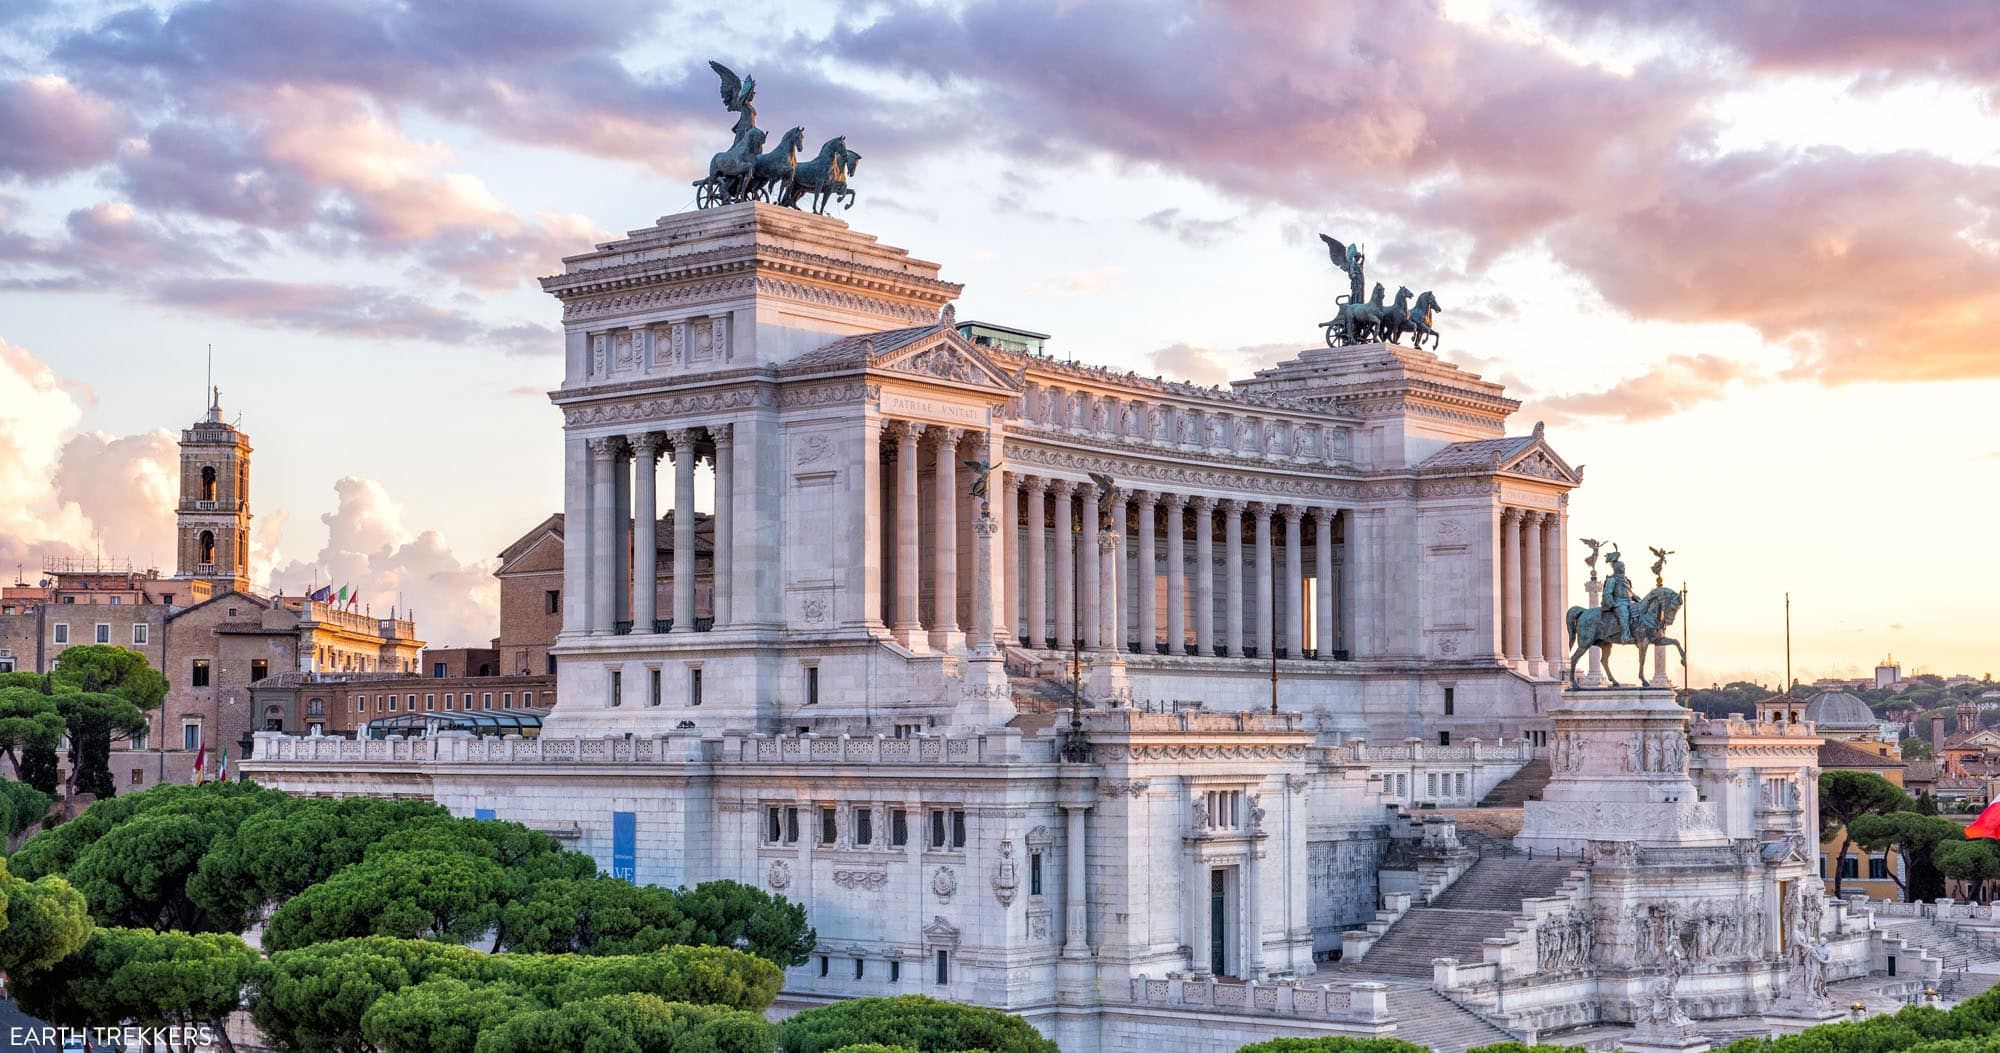 Featured image for “Rome Bucket List: 40 Epic Things to Do in Rome”